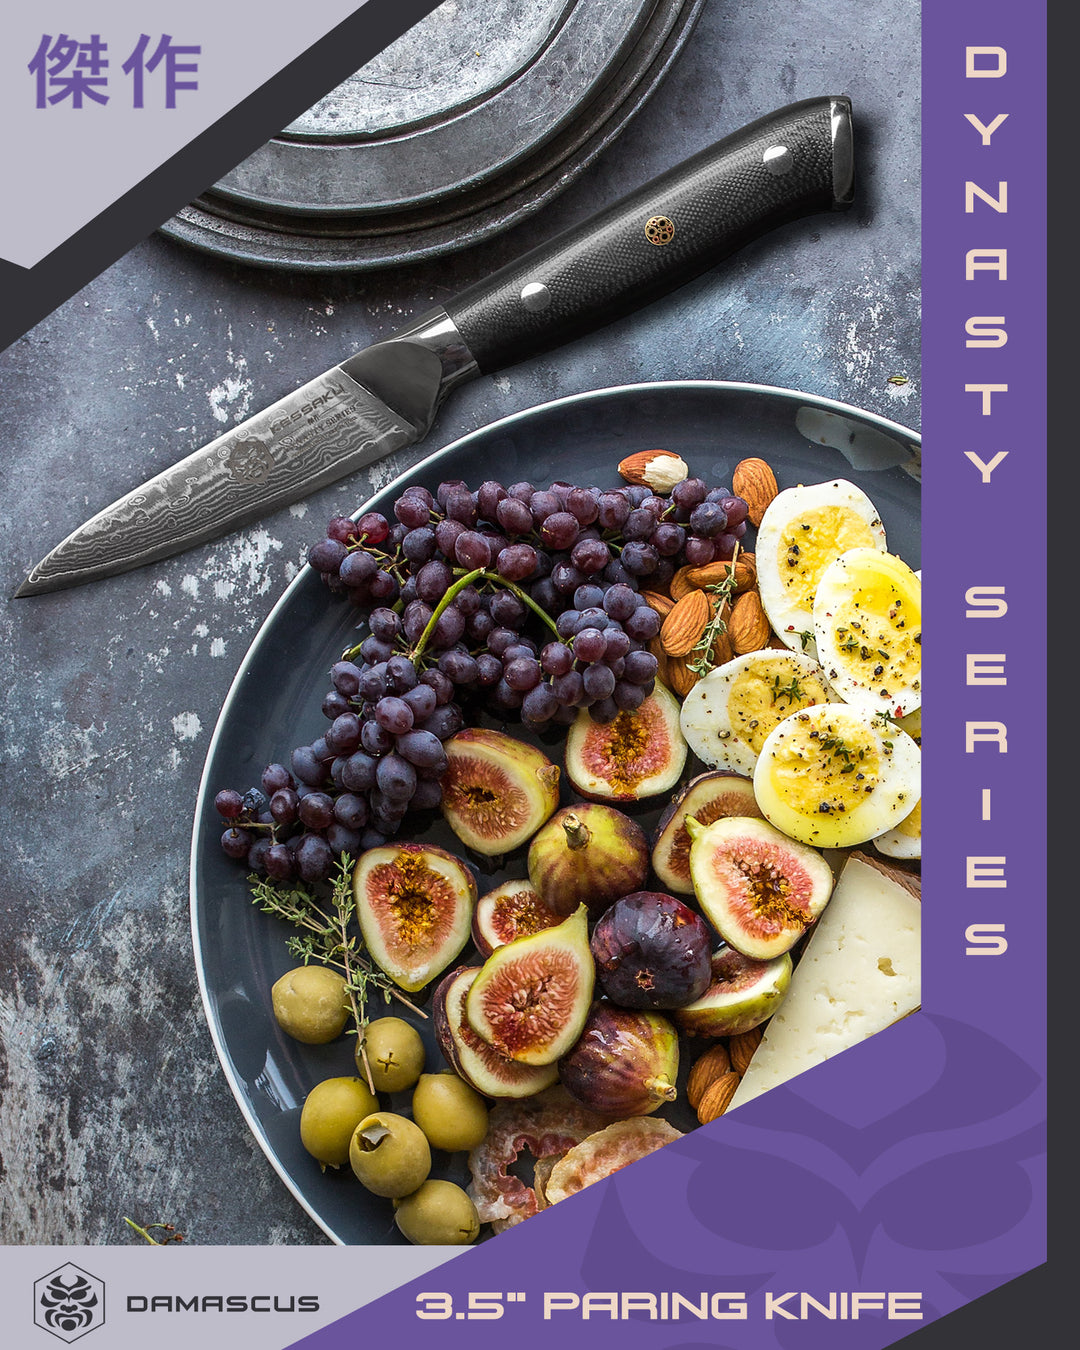 The Dynasty Damascus Paring Knife with a plate of sliced hard boiled eggs, figs, red grapes, and almonds.